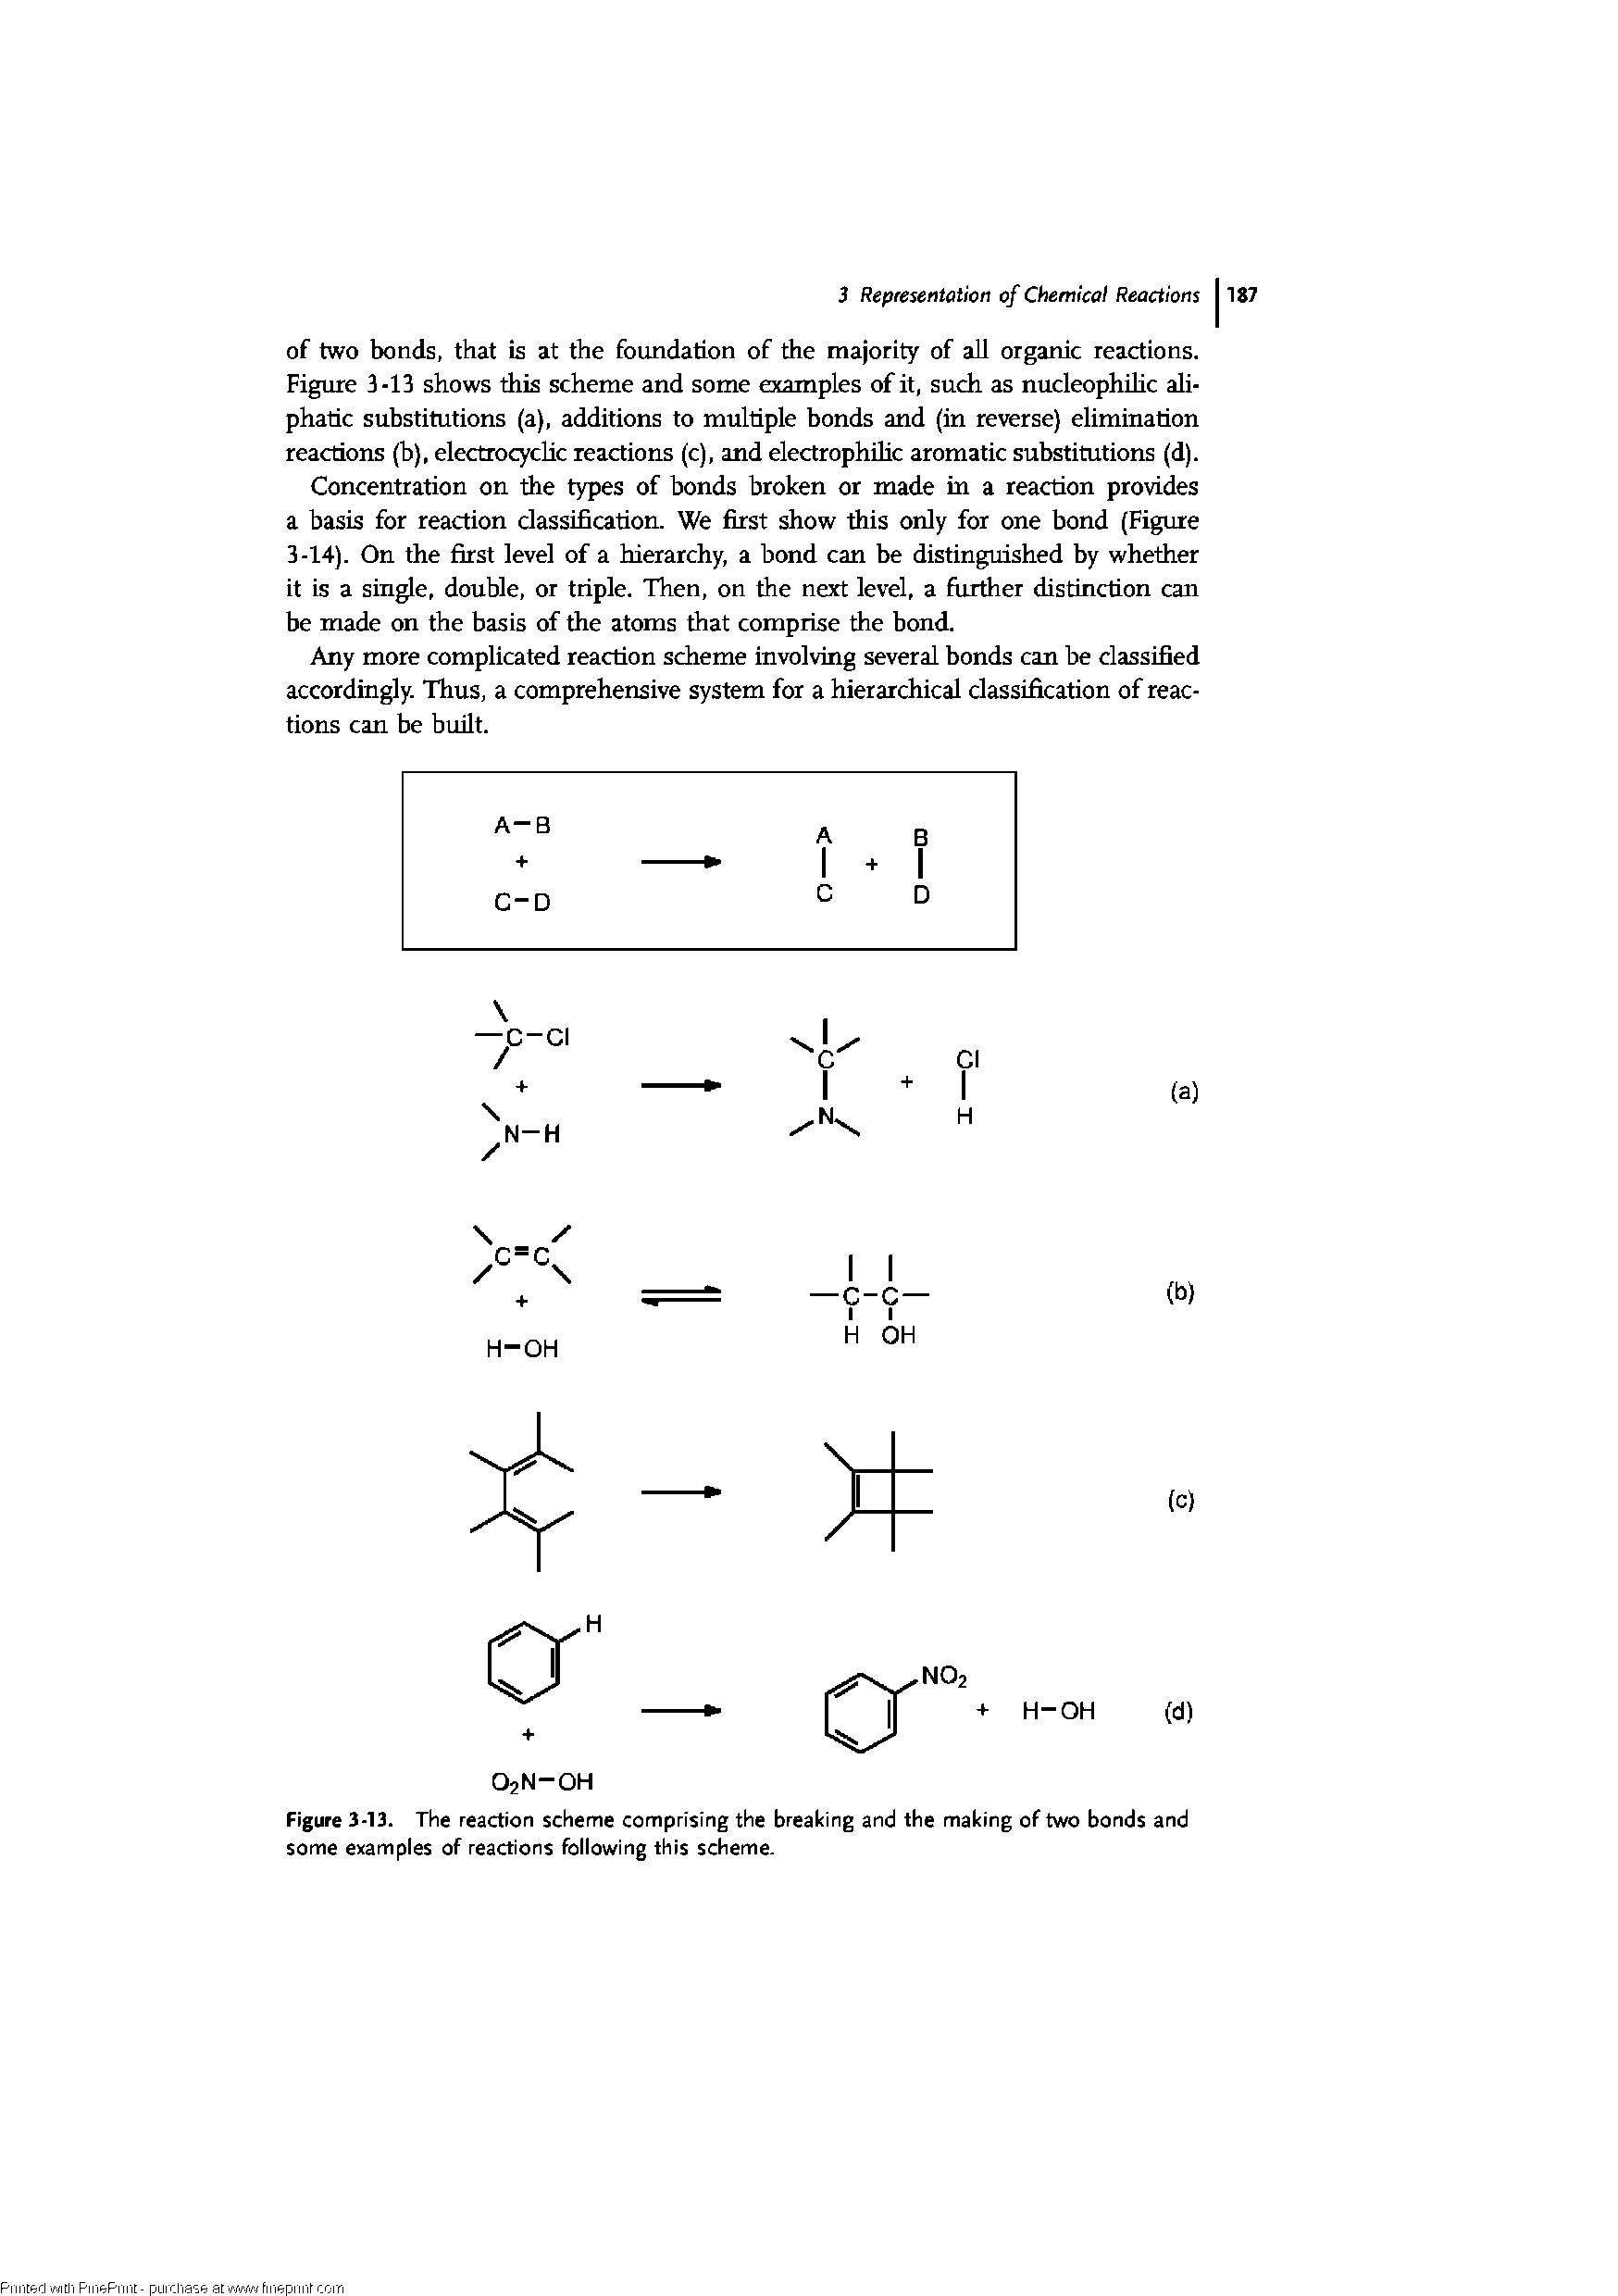 Figure 3-13. The reaction scheme comprising the breaking and the making of two bonds and some examples of reactions following this scheme.